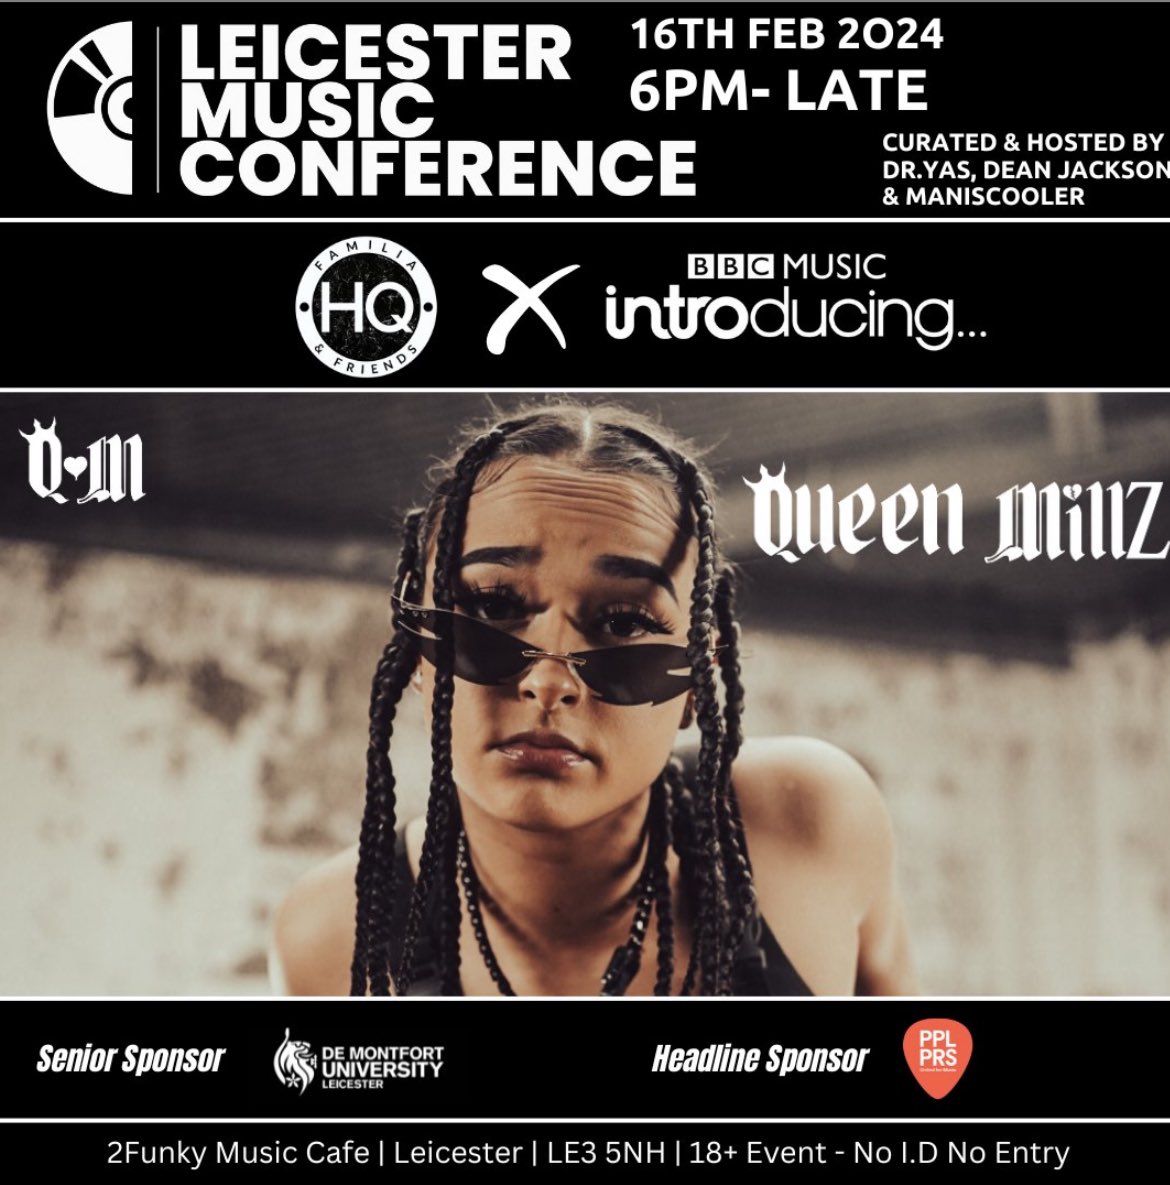 New day, new artist announcement! Introducing Queen Mills, a silver-tongued rapper from Leicester with a story to tell. Tickets available now!